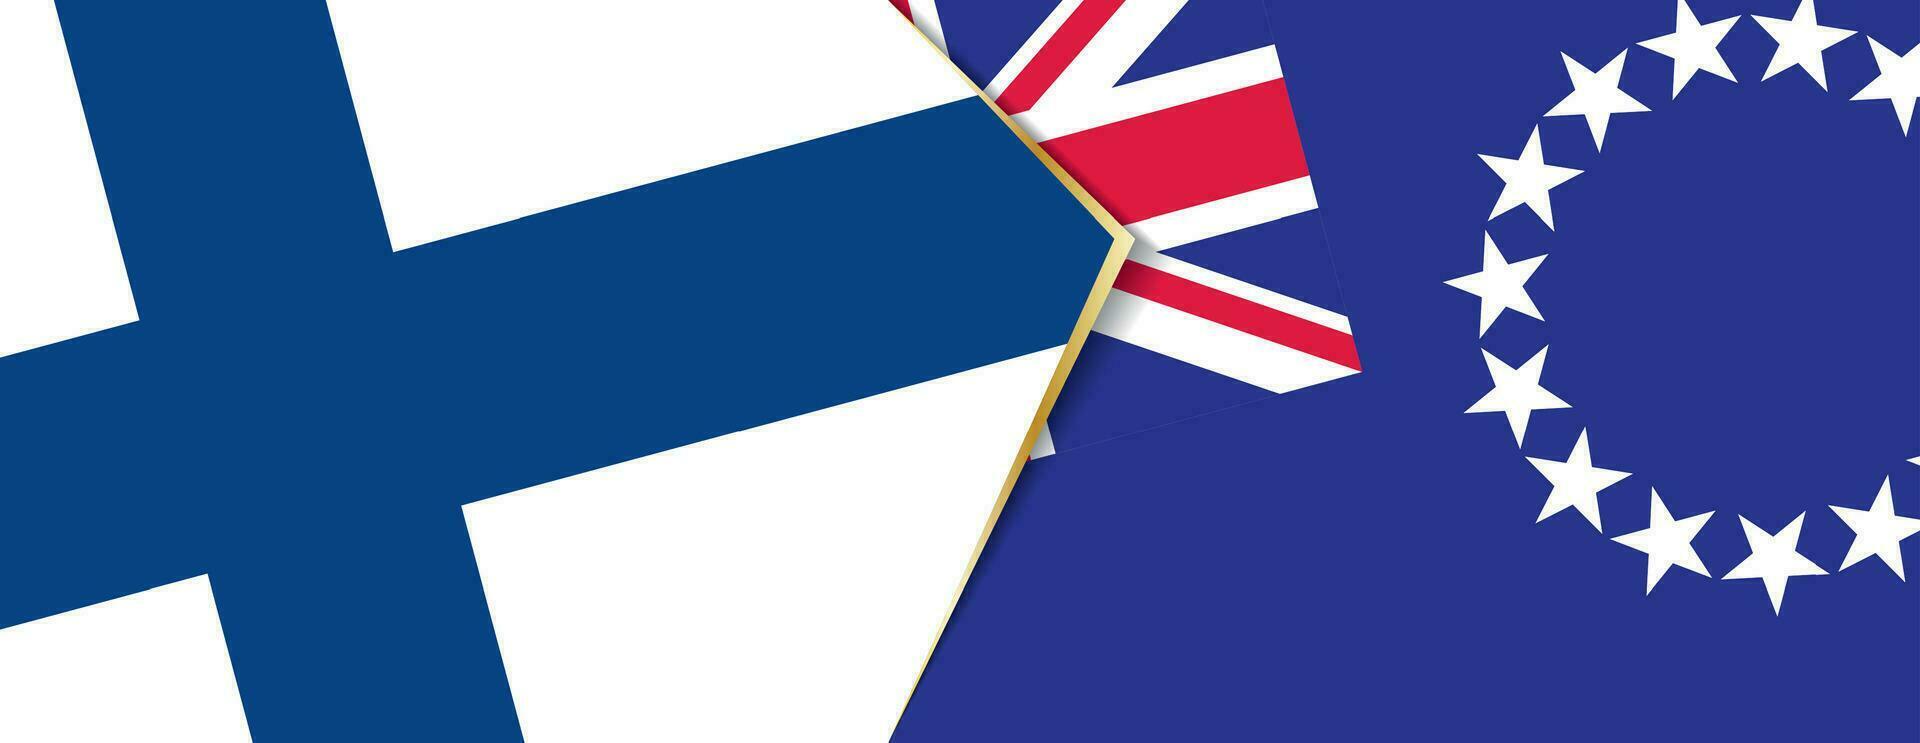 Finland and Cook Islands flags, two vector flags.